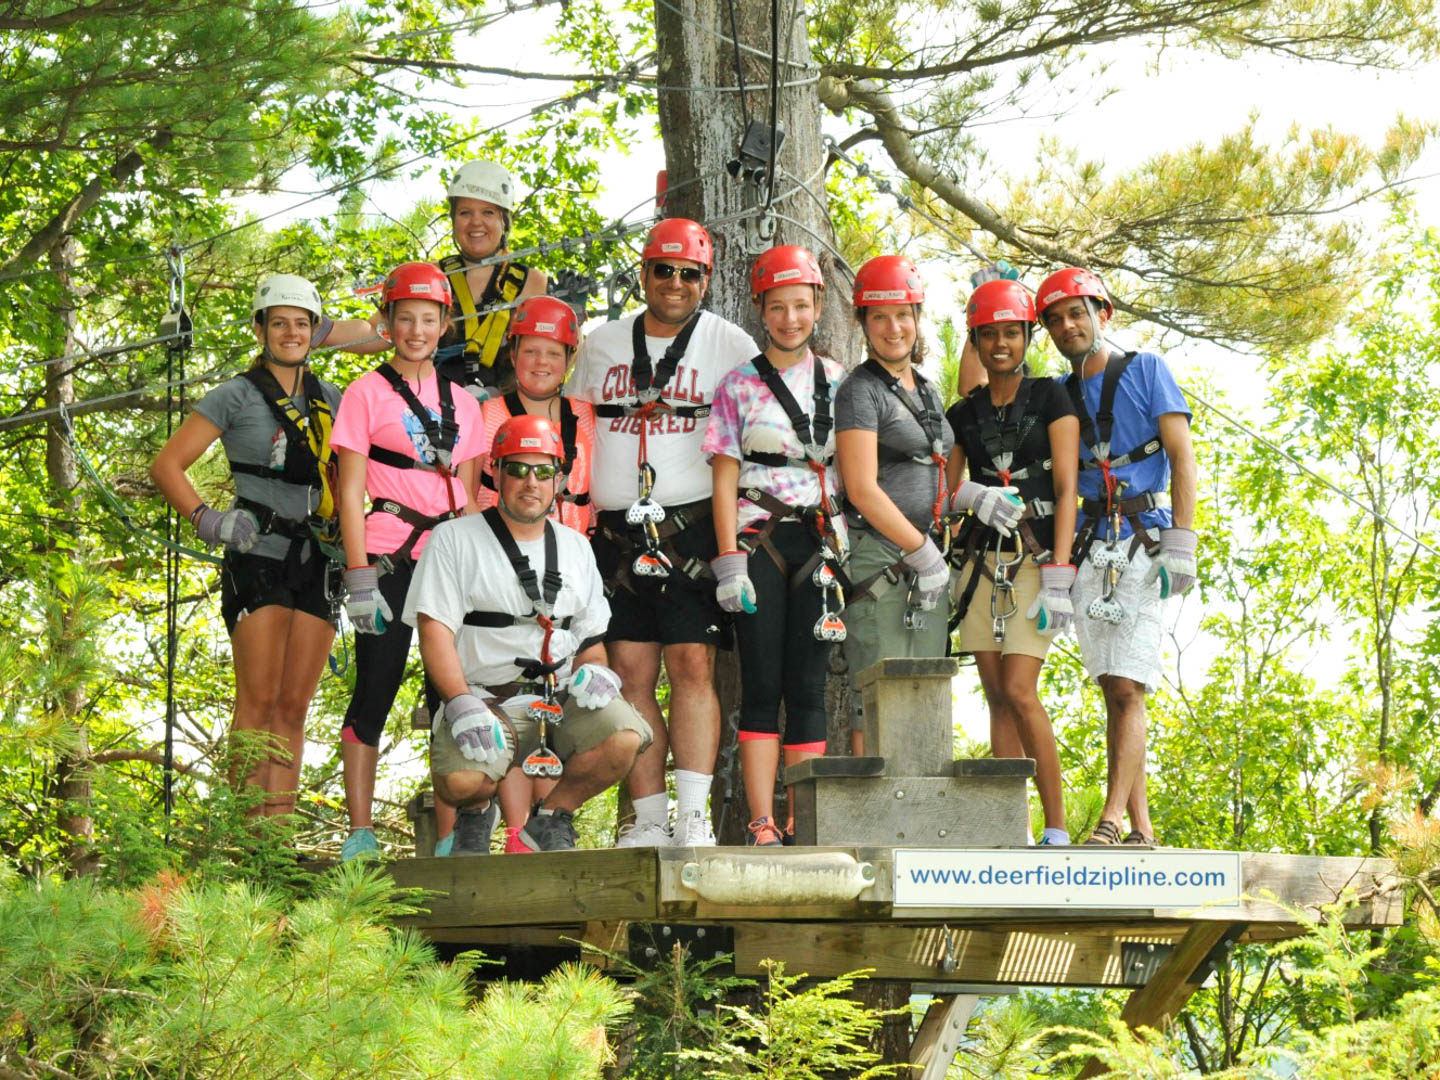 Group of people standing on a perch in the trees ready to zipline